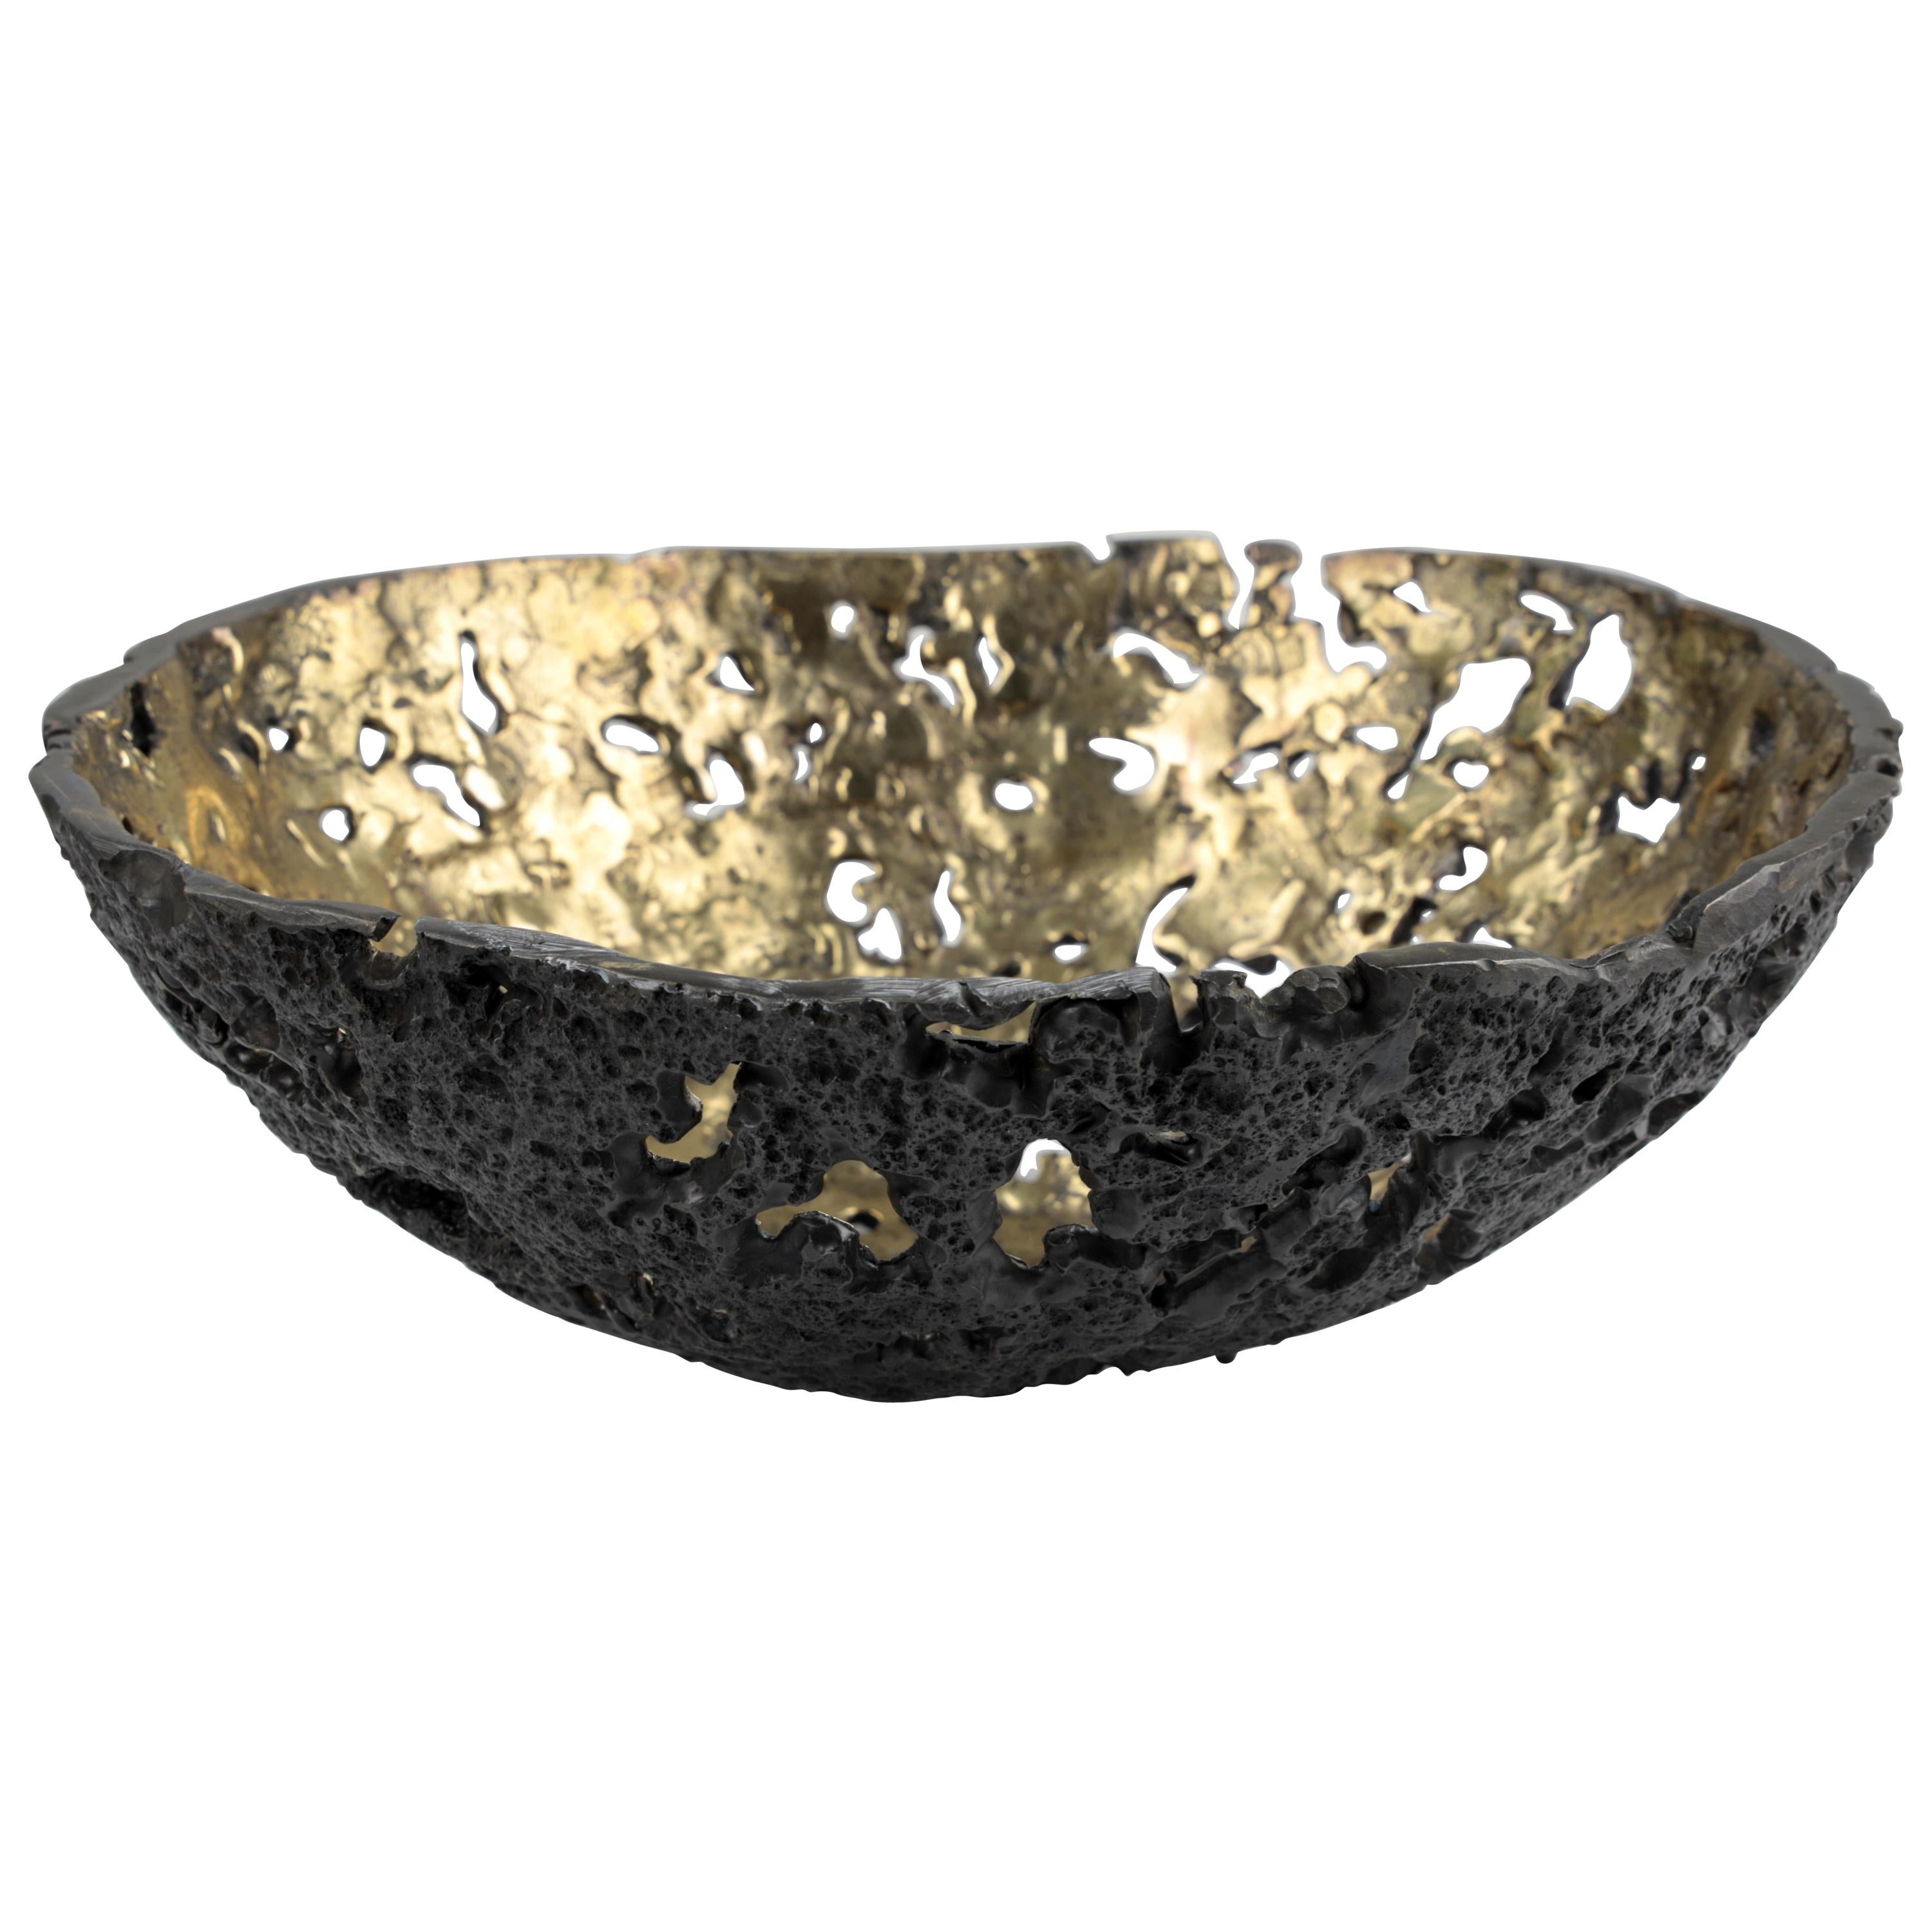 Equator Bowl in Bronze For Sale